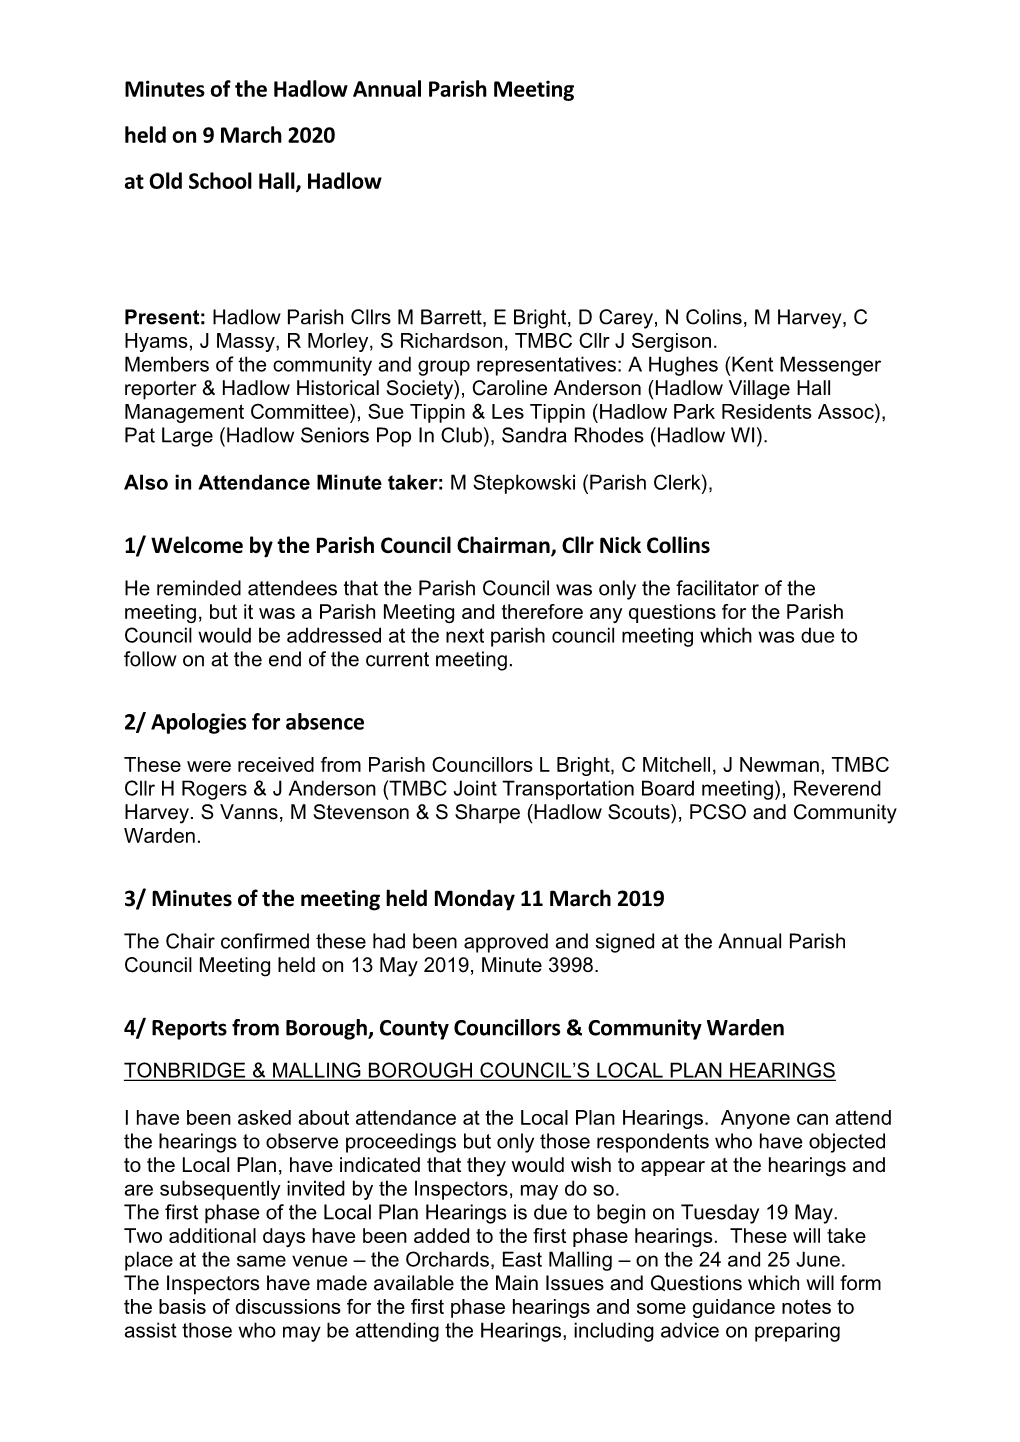 Minutes of the Hadlow Annual Parish Meeting 9 March 2020